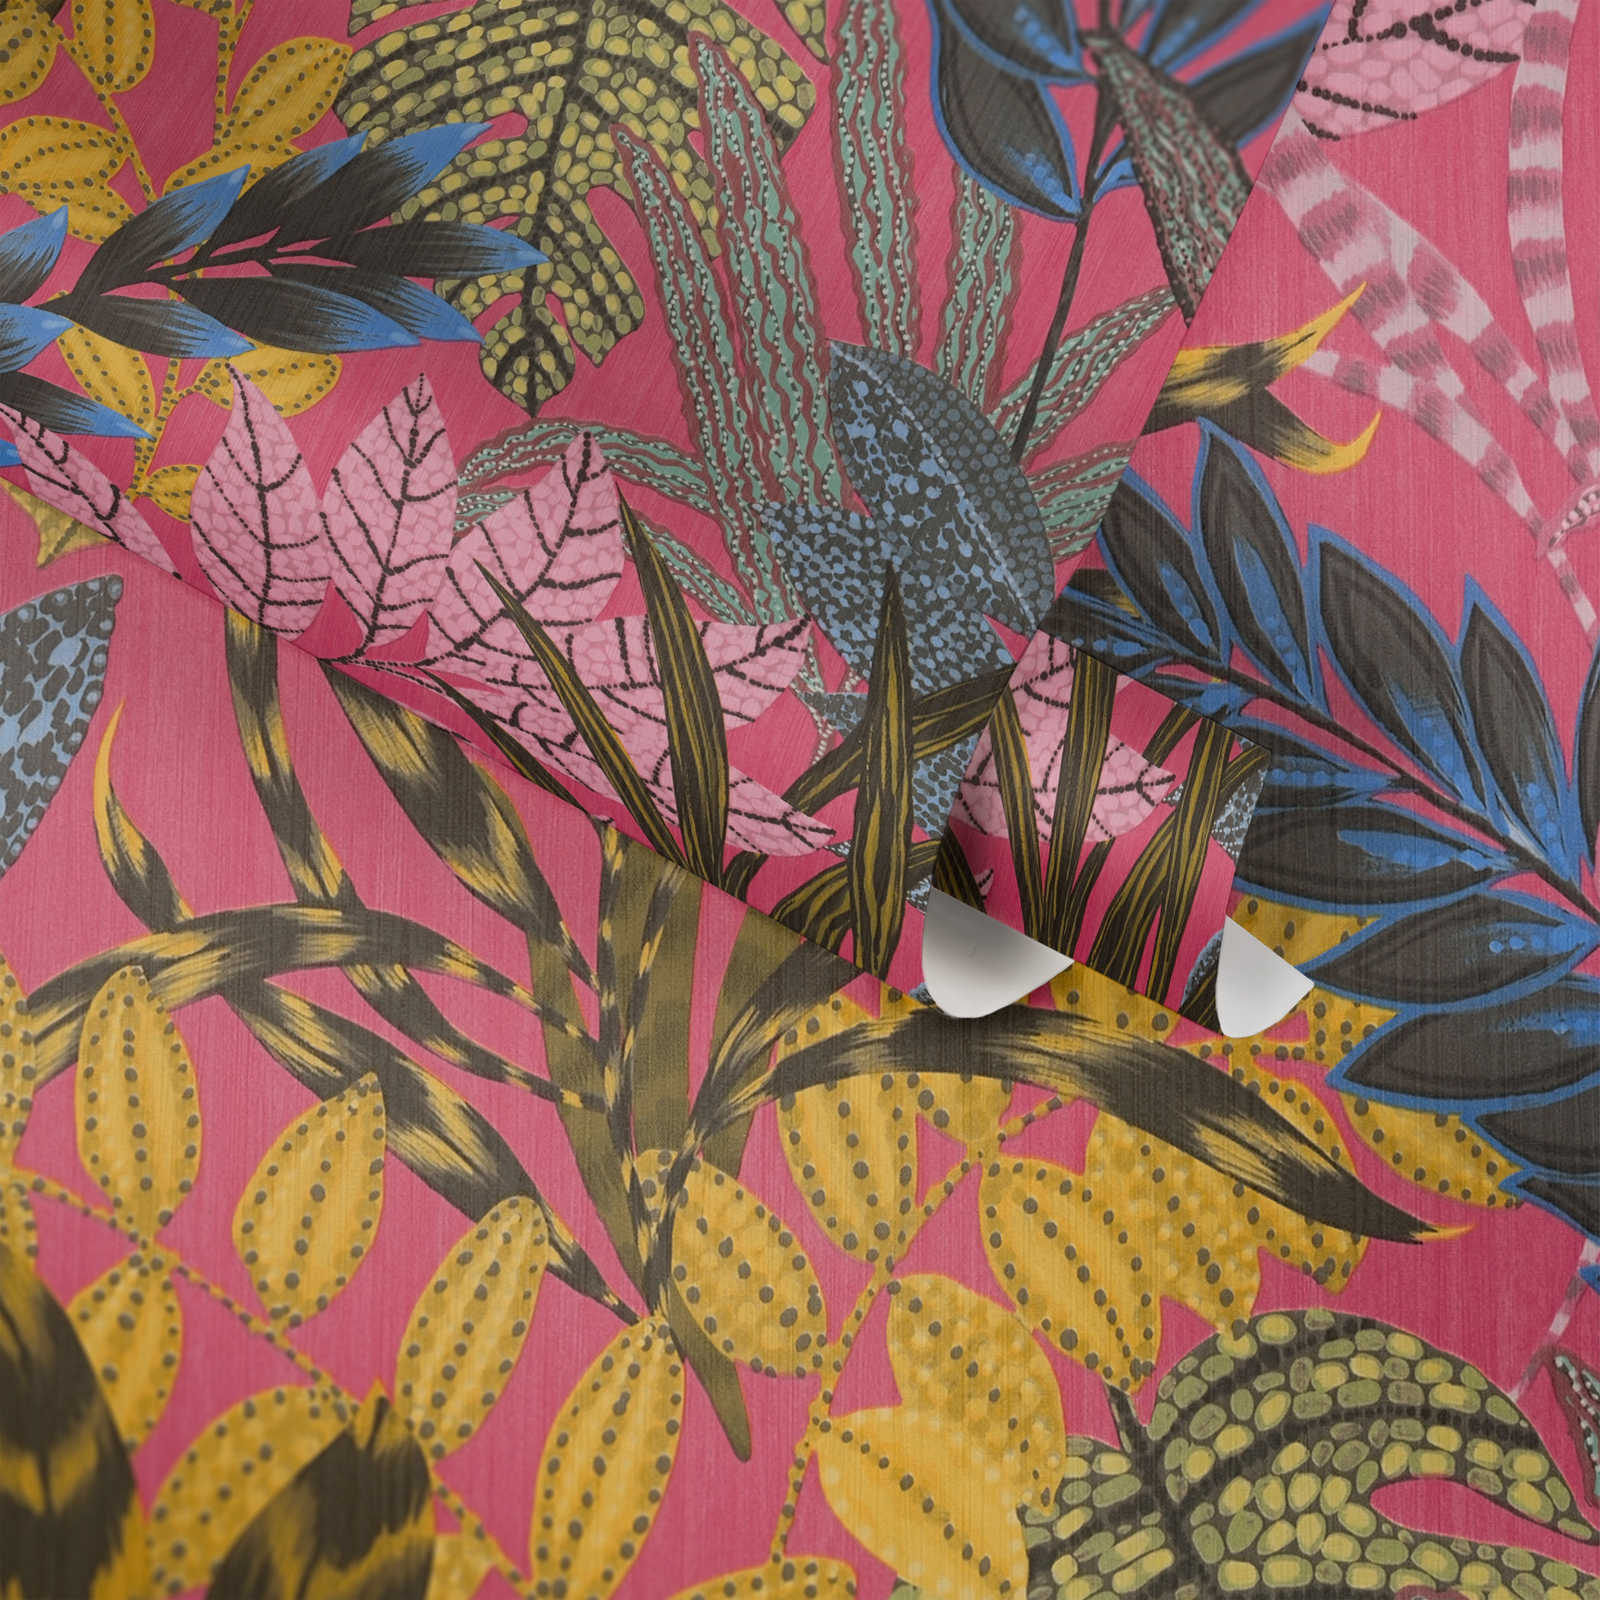             Colorful non-woven wallpaper with leaf motif & embossed structure - colourful, yellow, pink
        